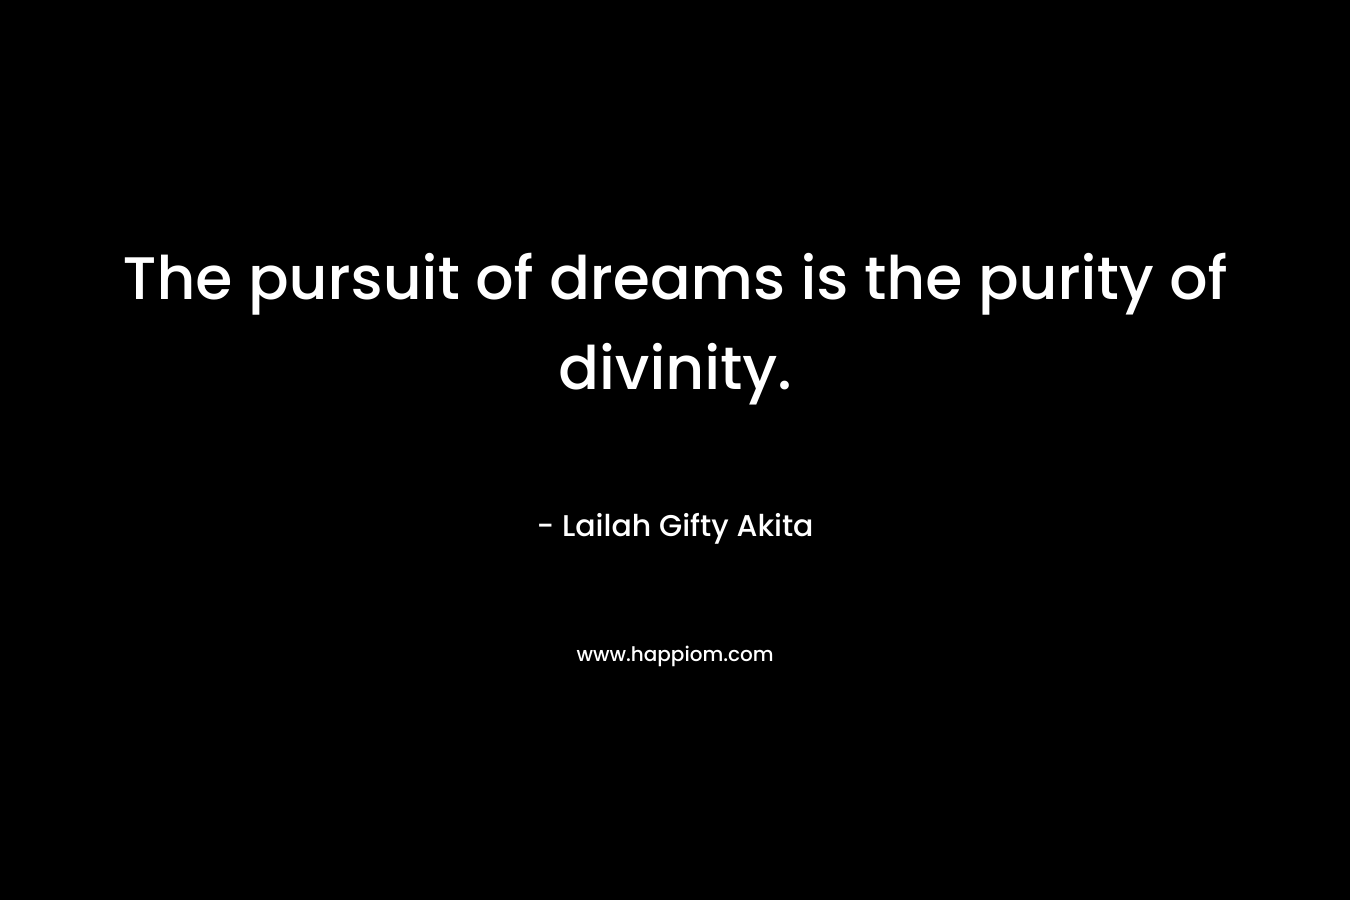 The pursuit of dreams is the purity of divinity.